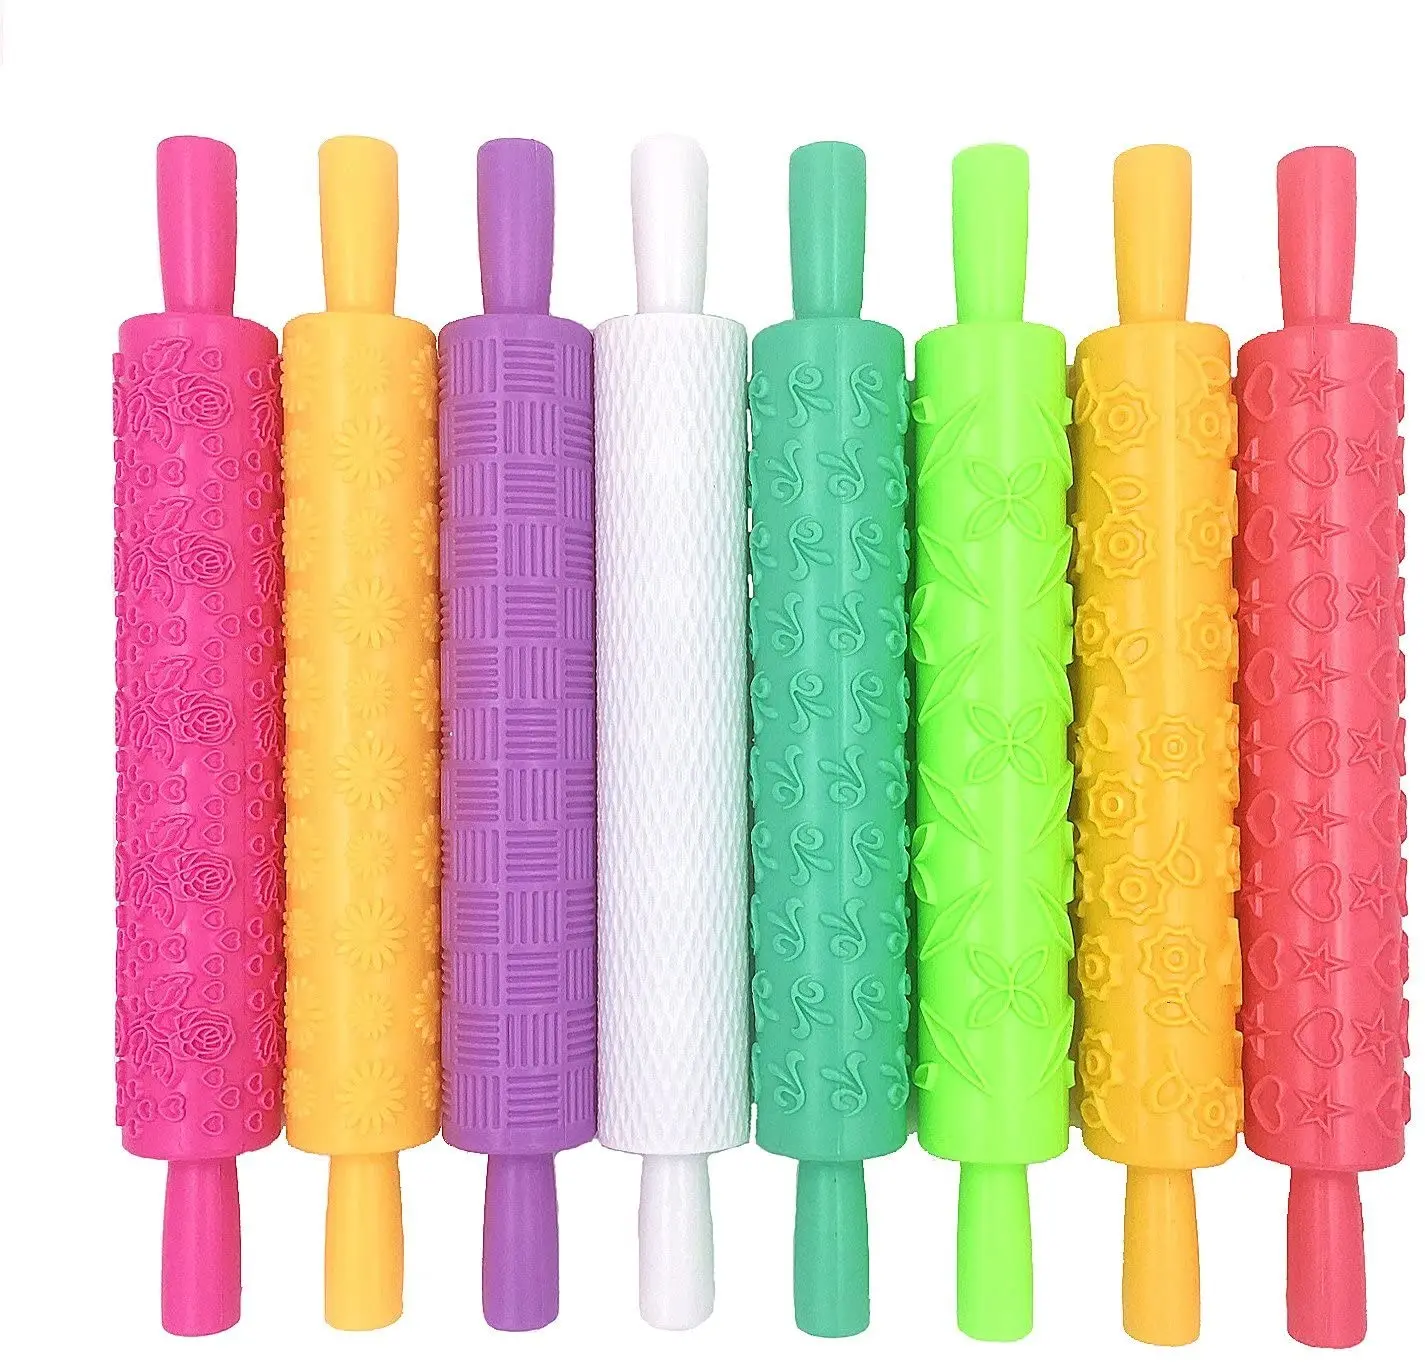 

8Pcs Cake Decorating Embossed Rolling Pins,Textured Non-Stick Designs and Patterned,Ideal for Pie Crust,Cookie,Pastry,Clay,Icing